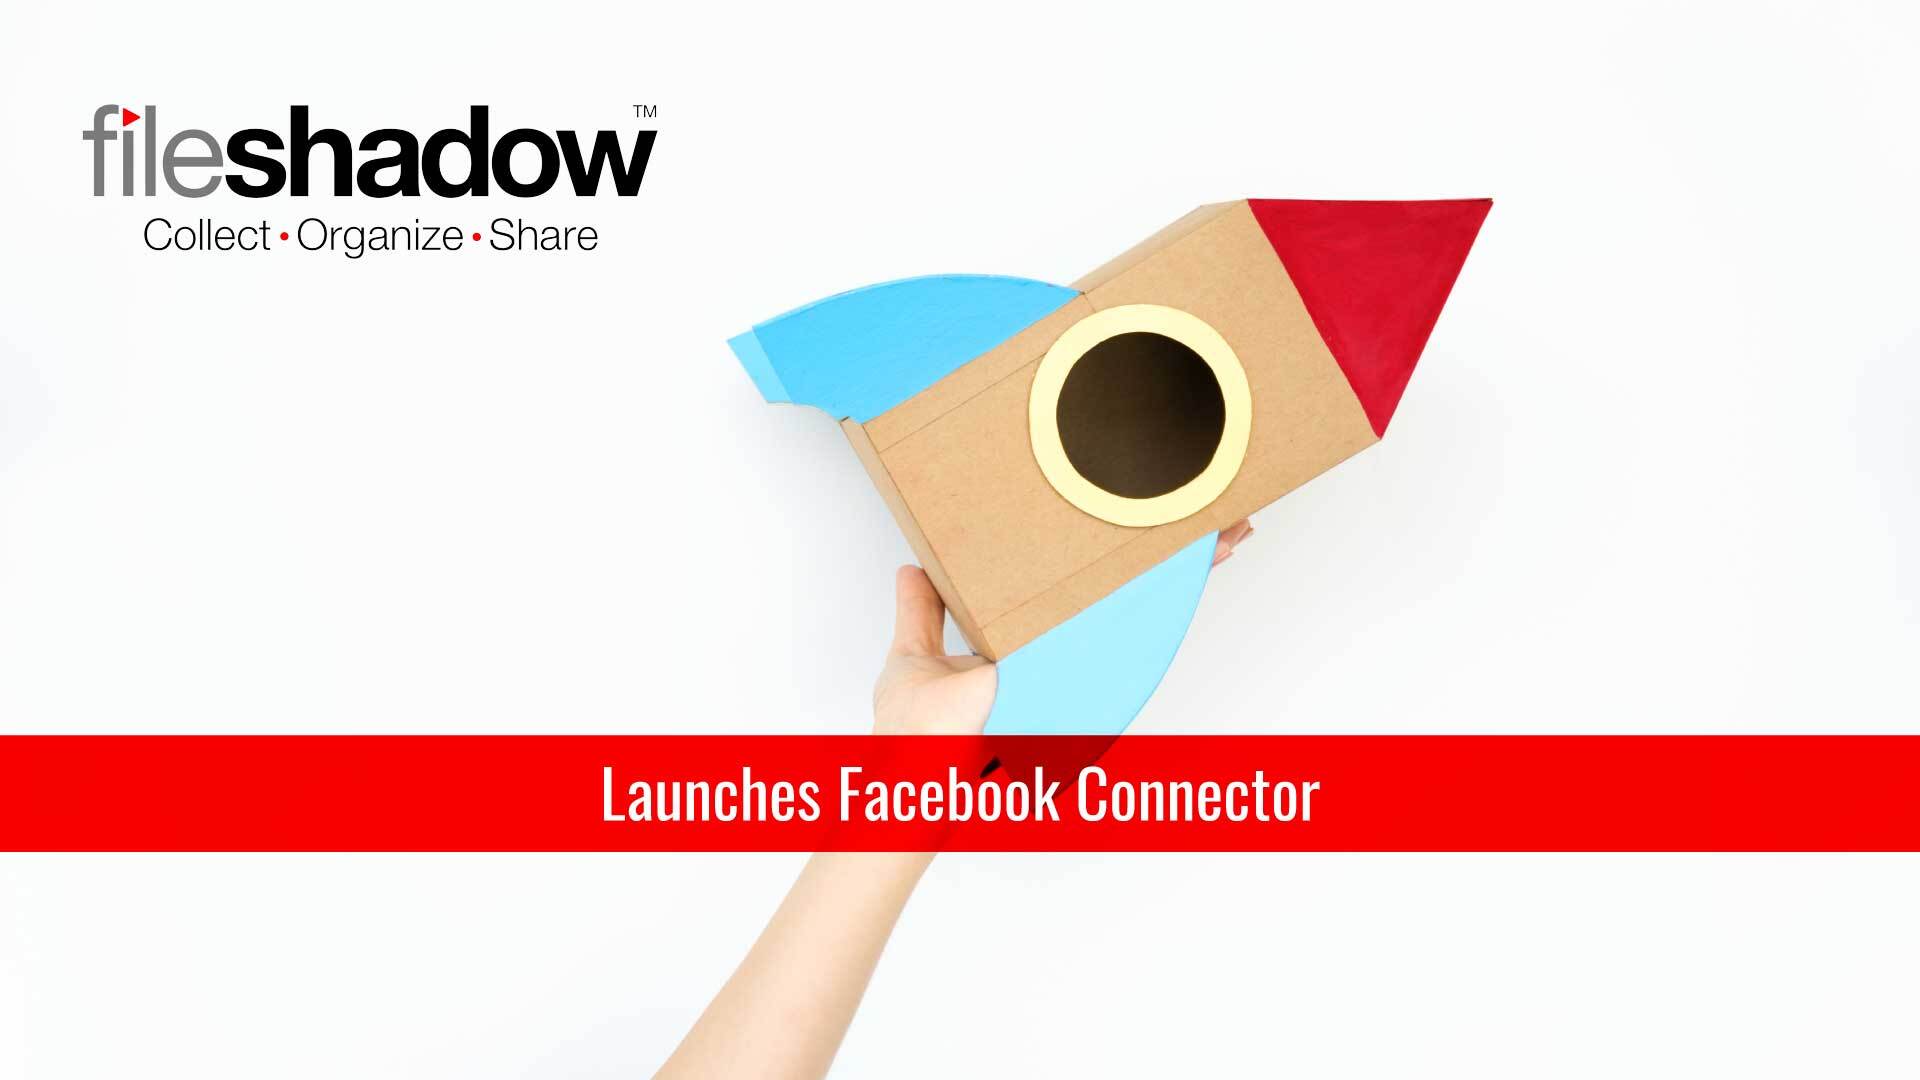 FileShadow Launches Facebook Connector, Giving Small Businesses the Power to Collect and Post Images to Social Media